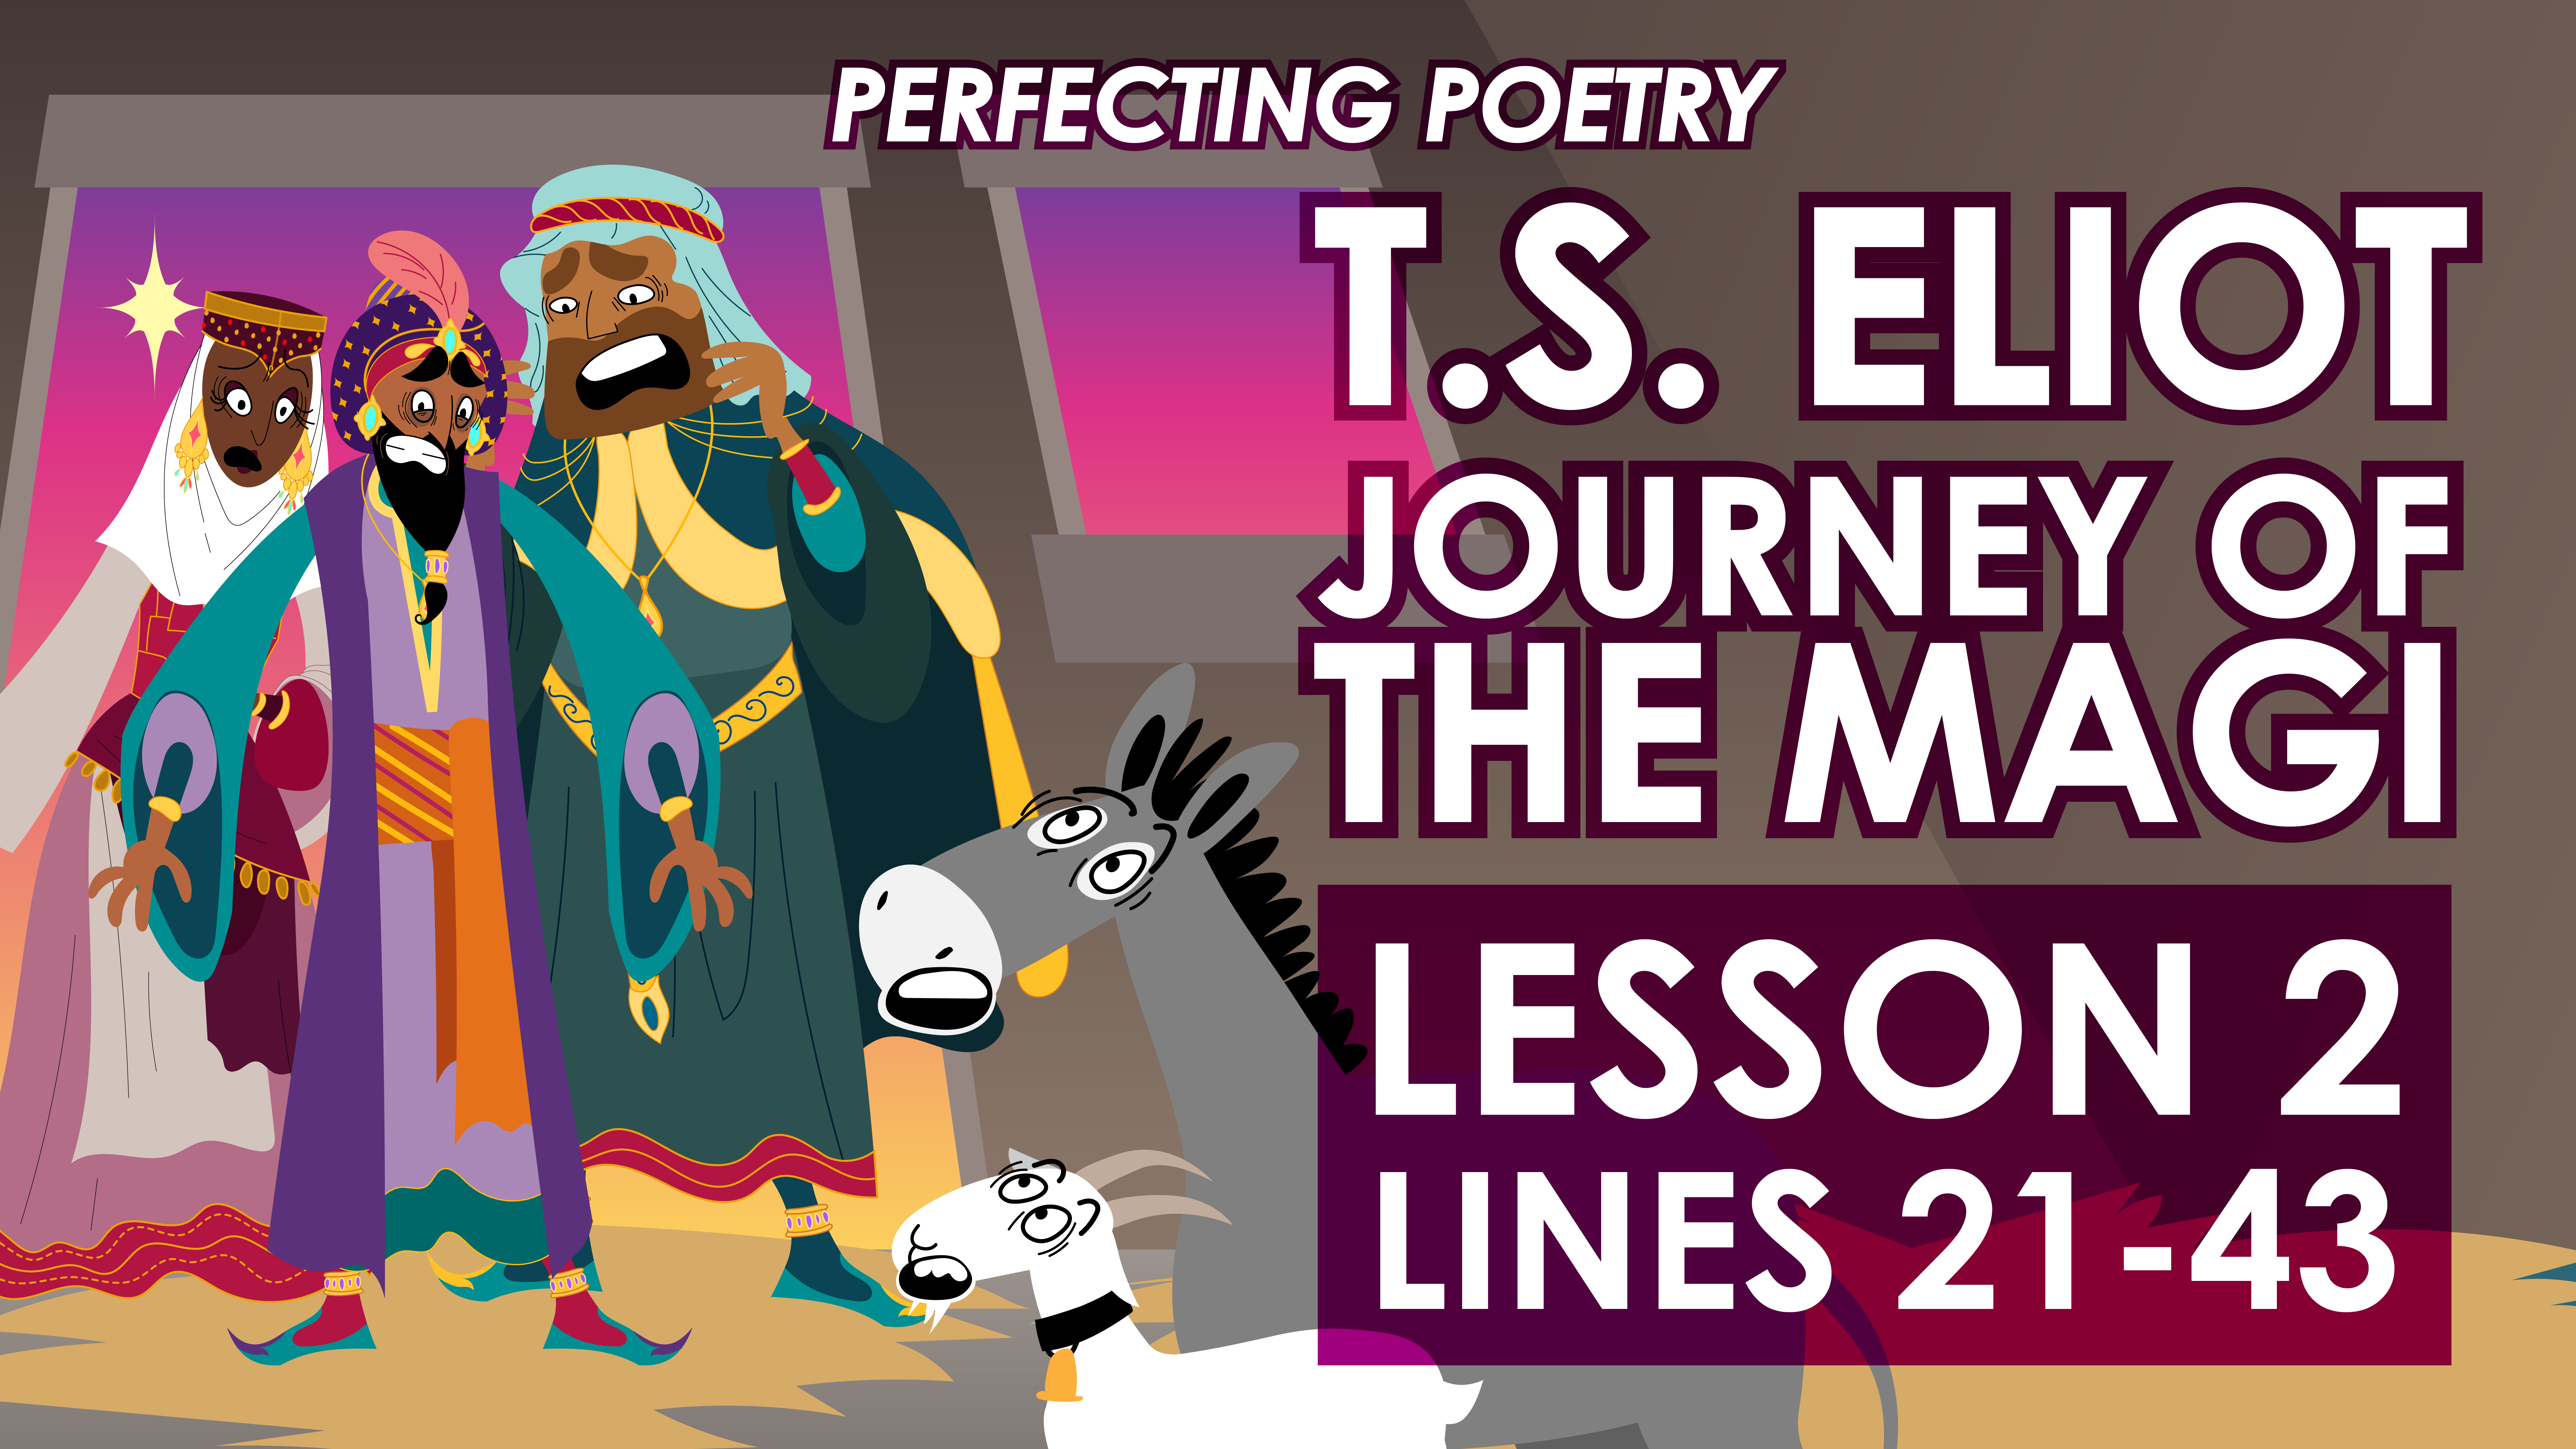 Journey Of The Magi - Lines 21-43 - T.S. Eliot - Perfecting Poetry	